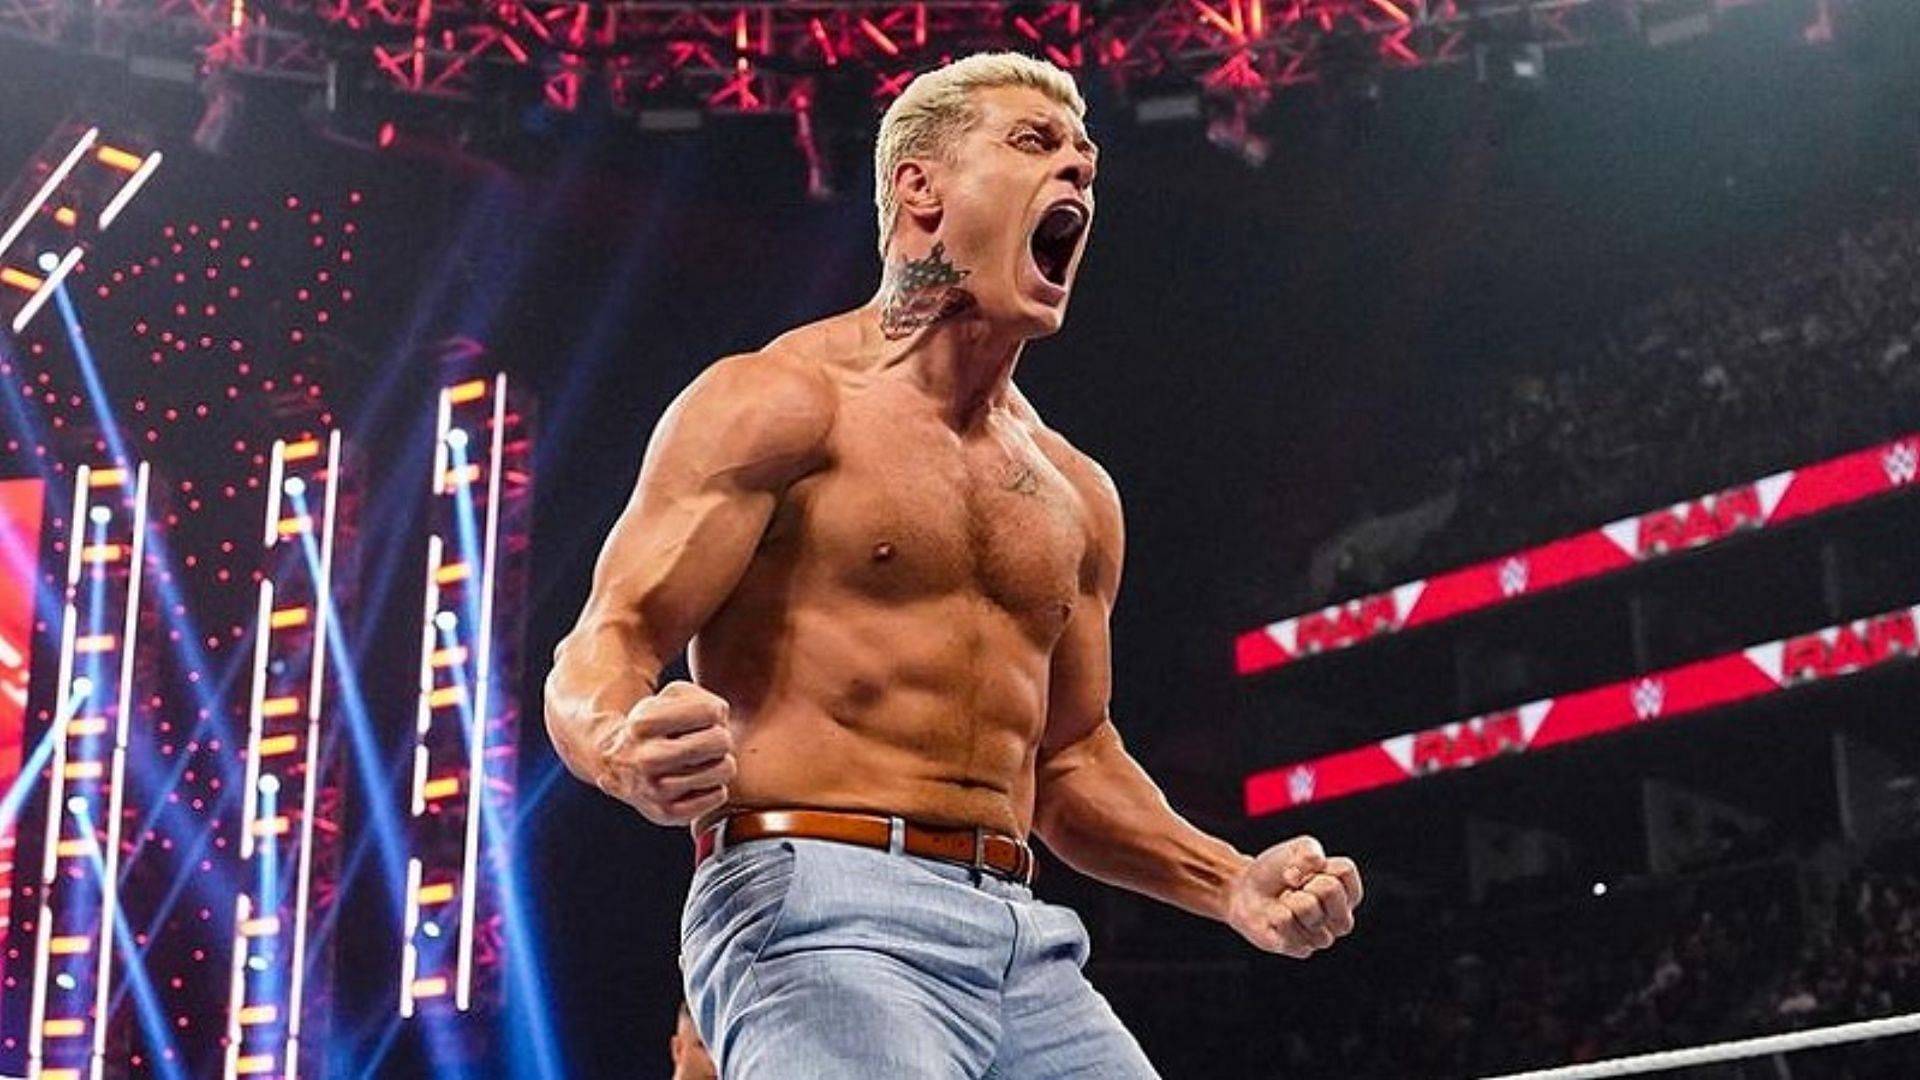 Cody Rhodes was drafted to RAW during Night 1 of WWE Draft 2023.